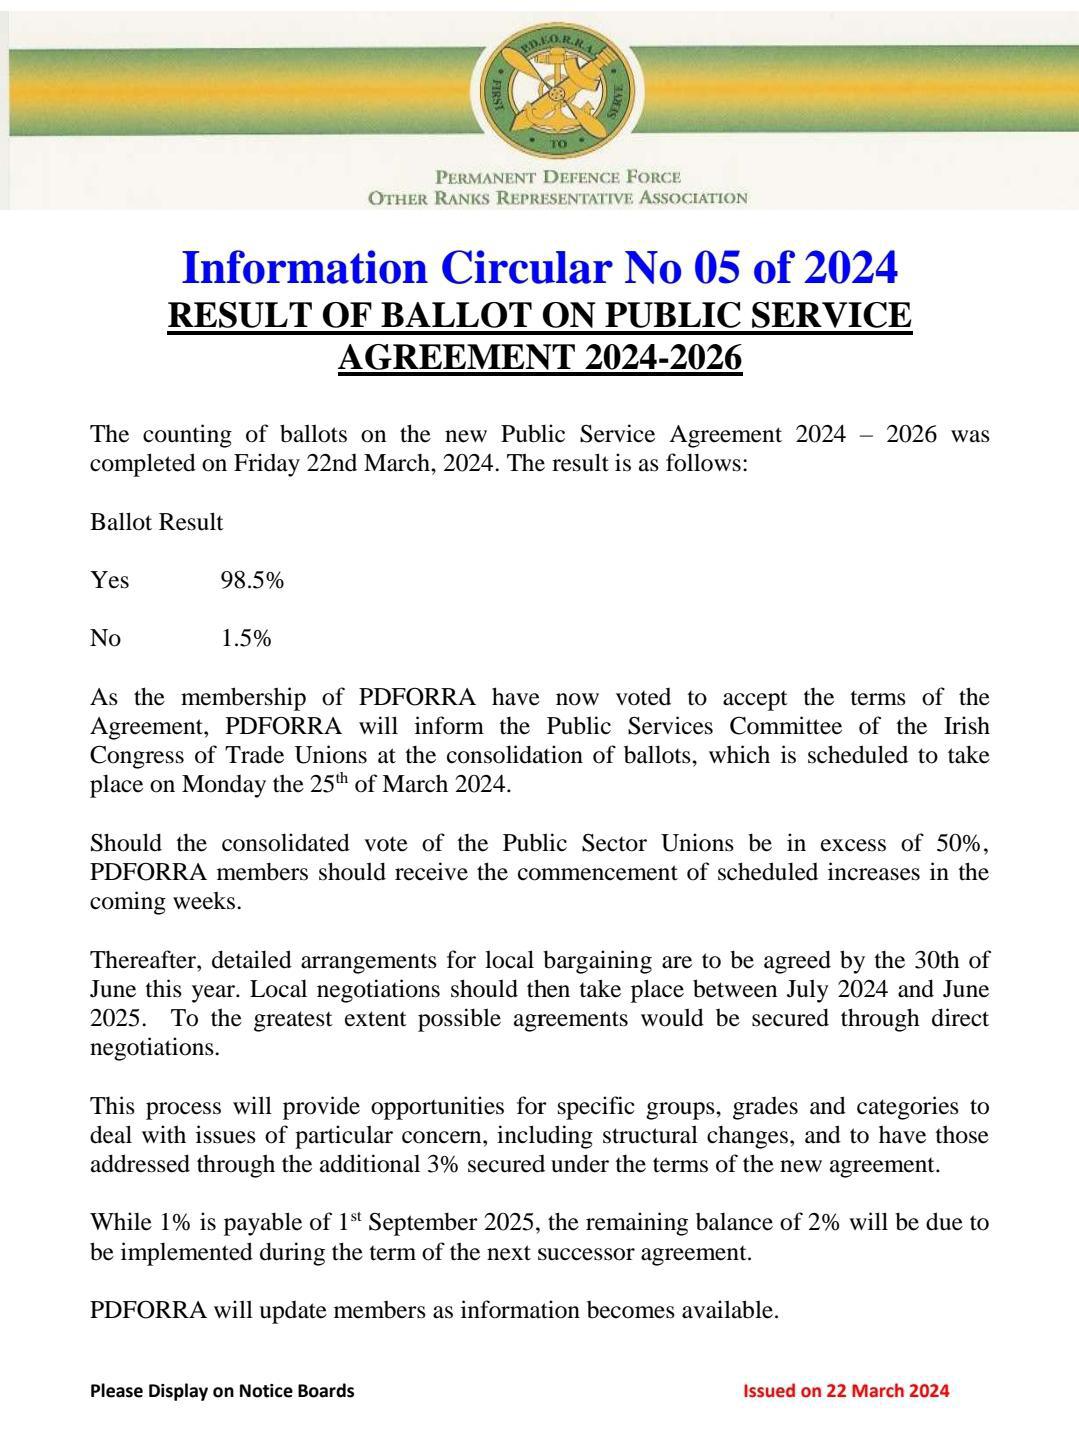 Information Circular No 05 of 2024 -Result of Ballot Public Service Agreement 2024-2026